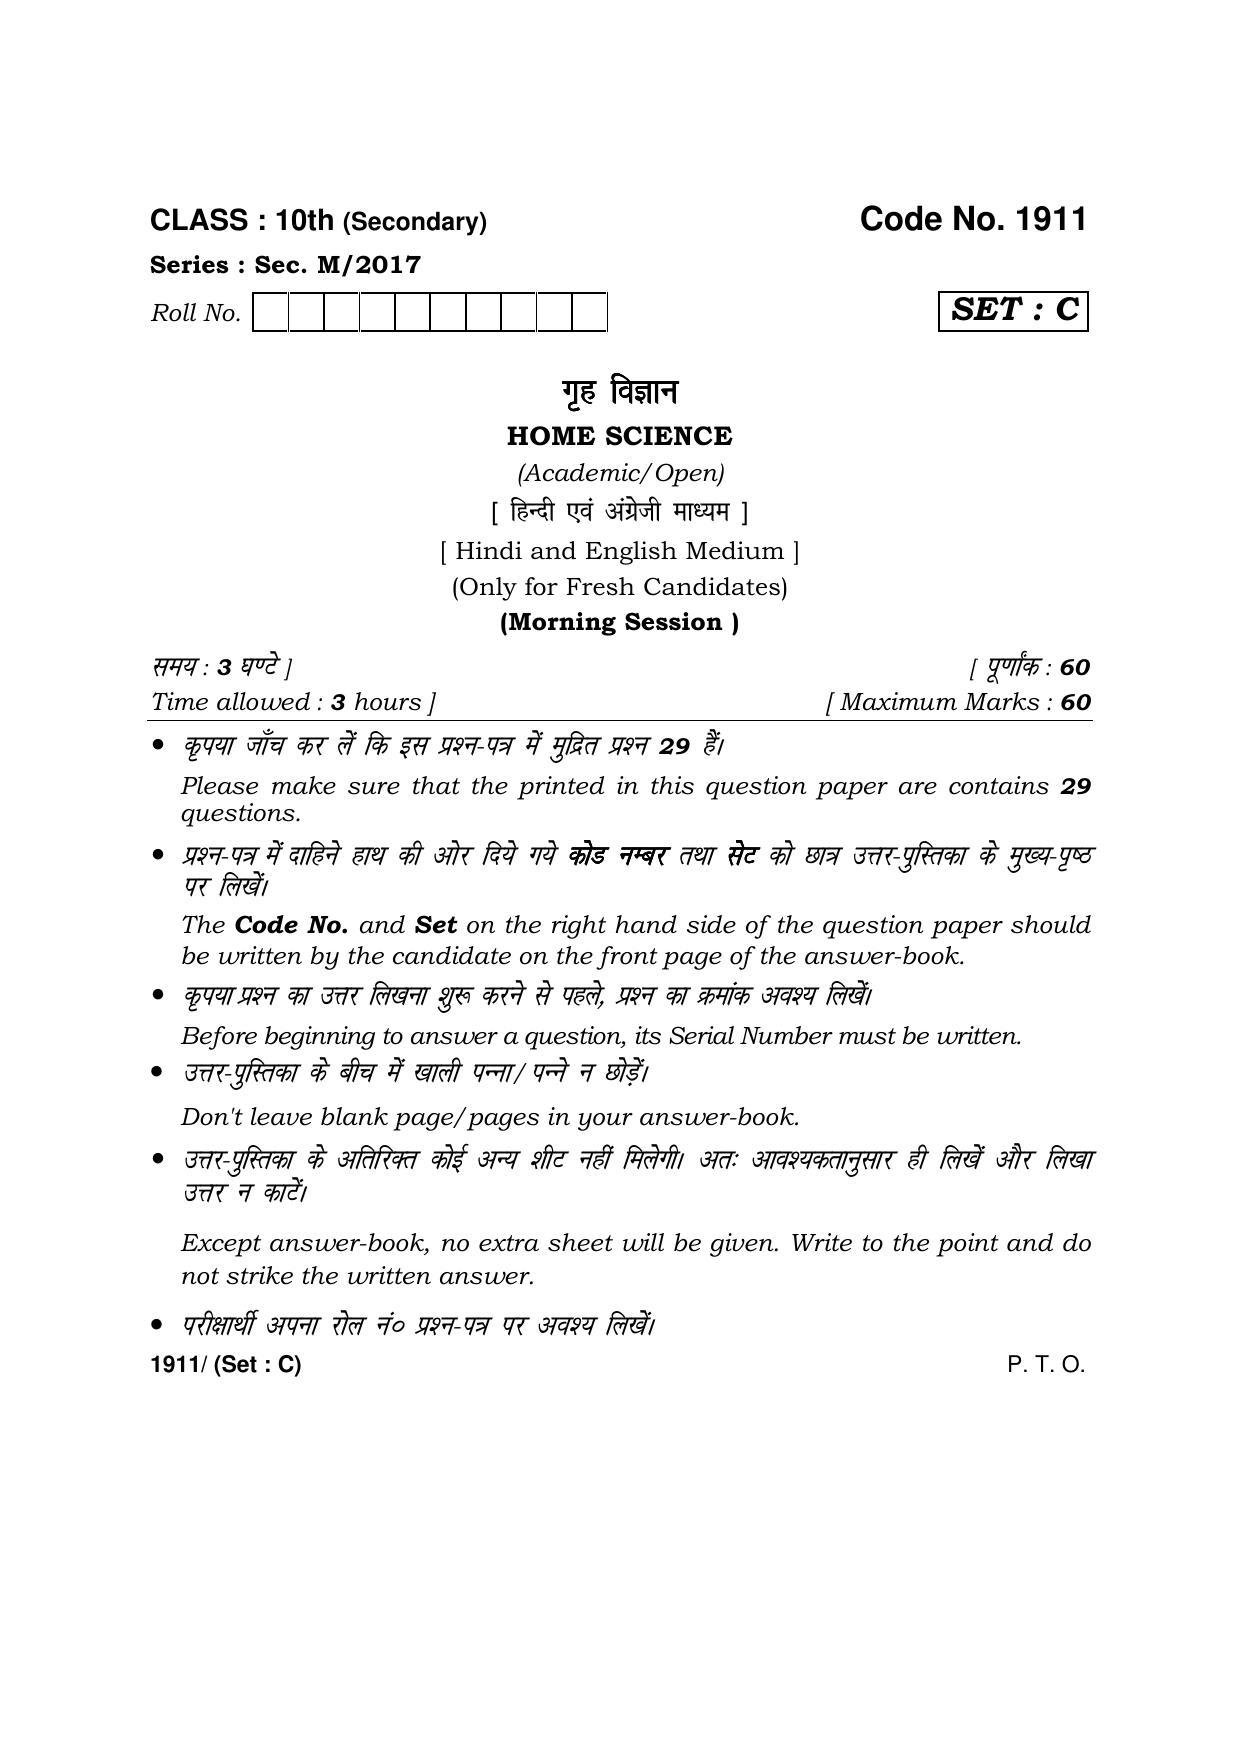 Haryana Board HBSE Class 10 Home Science -C Question Paper - Page 1